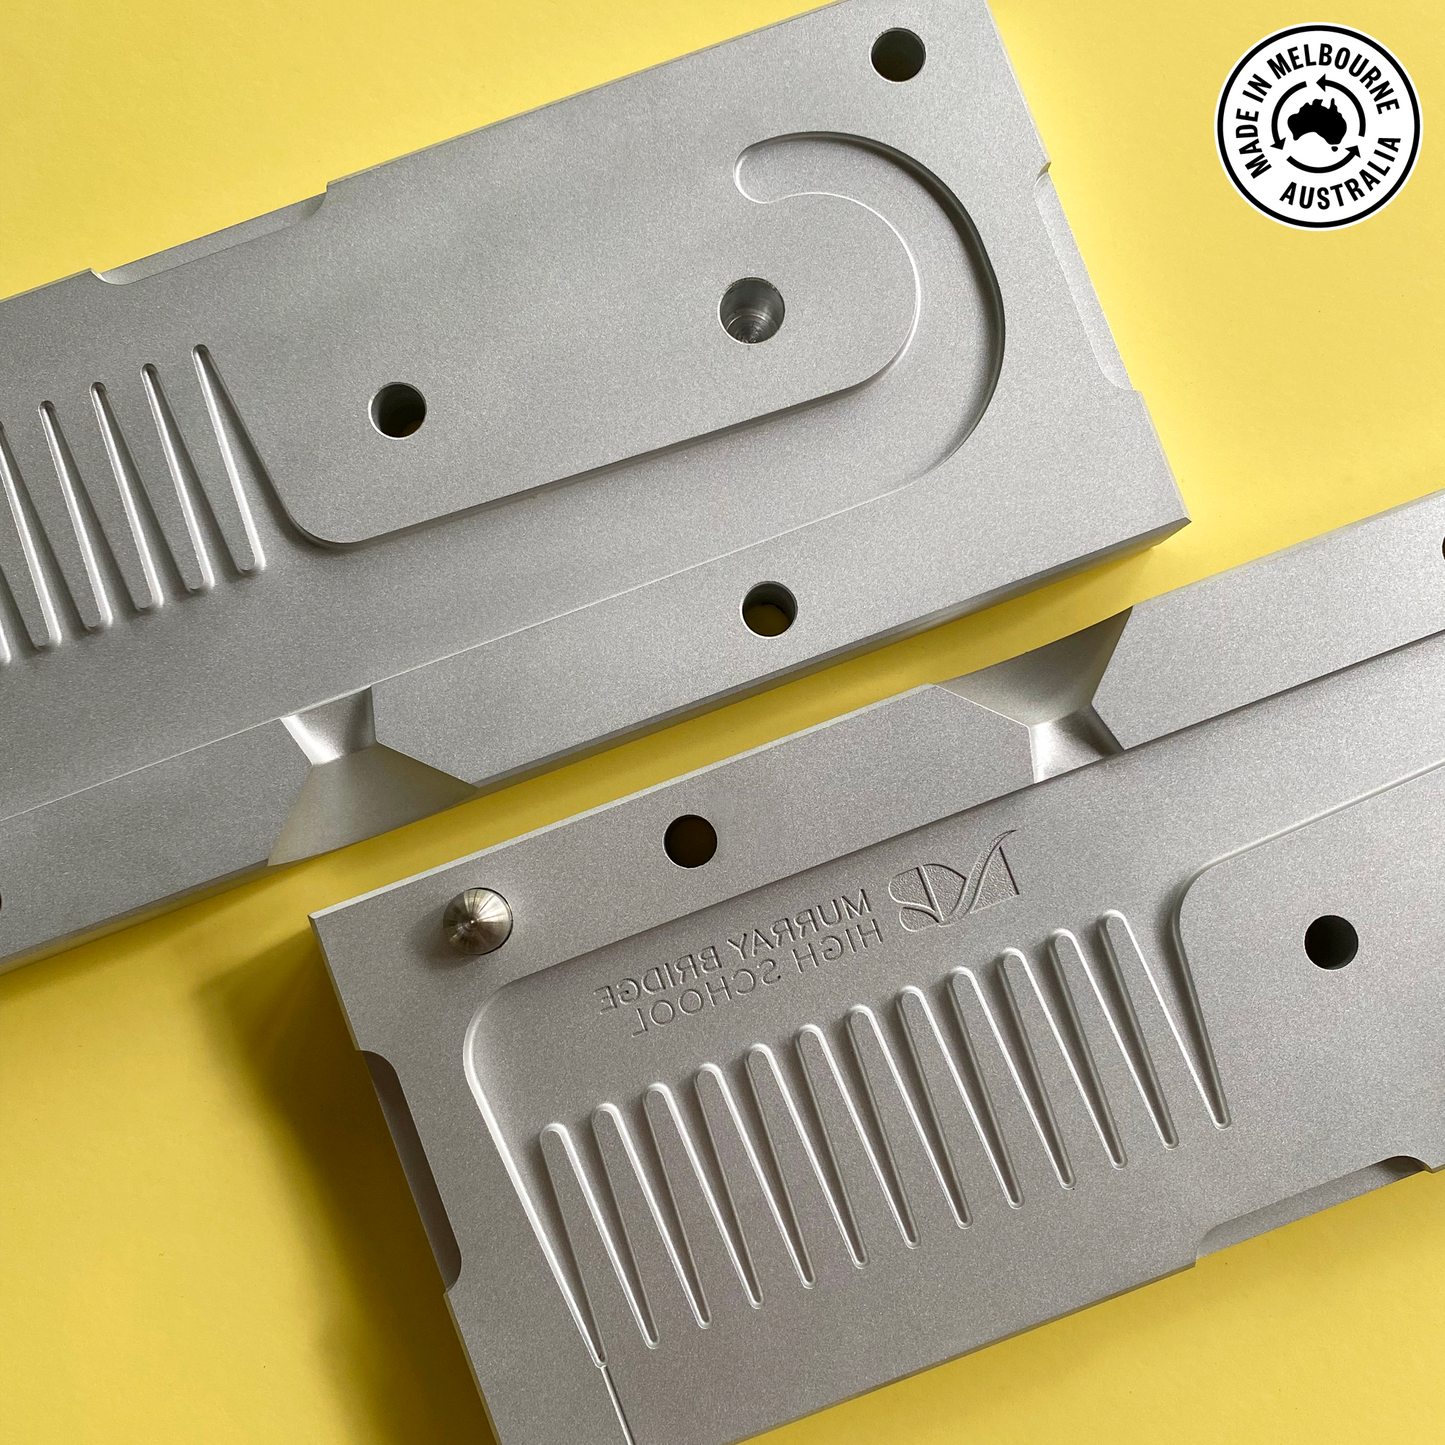 Shower comb product mould for precious plastic machines